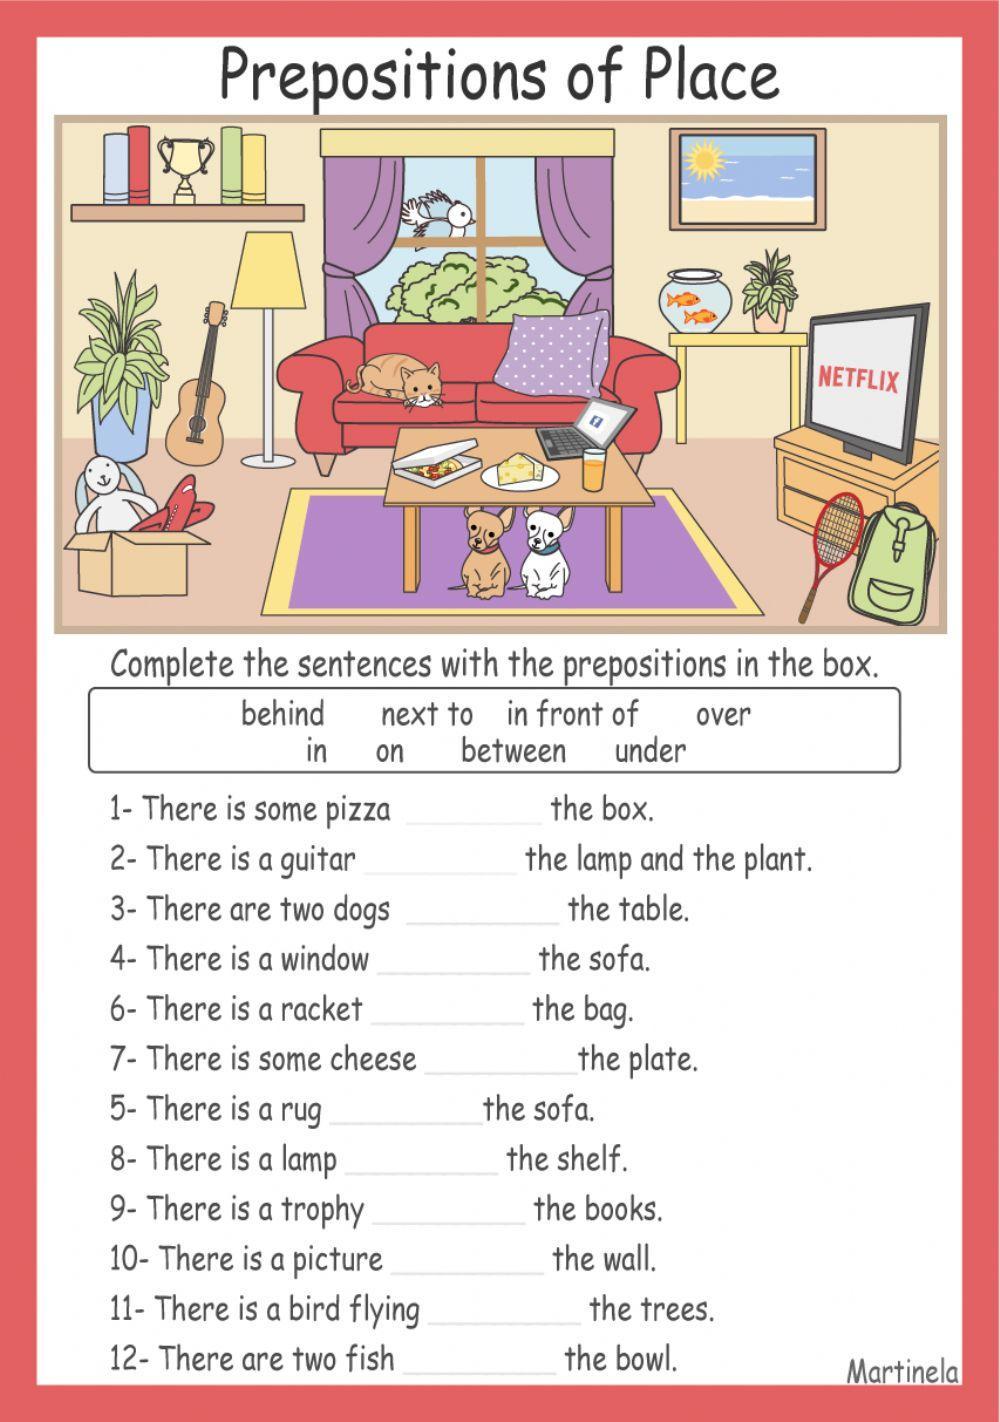 Prepositions of place-1ESO